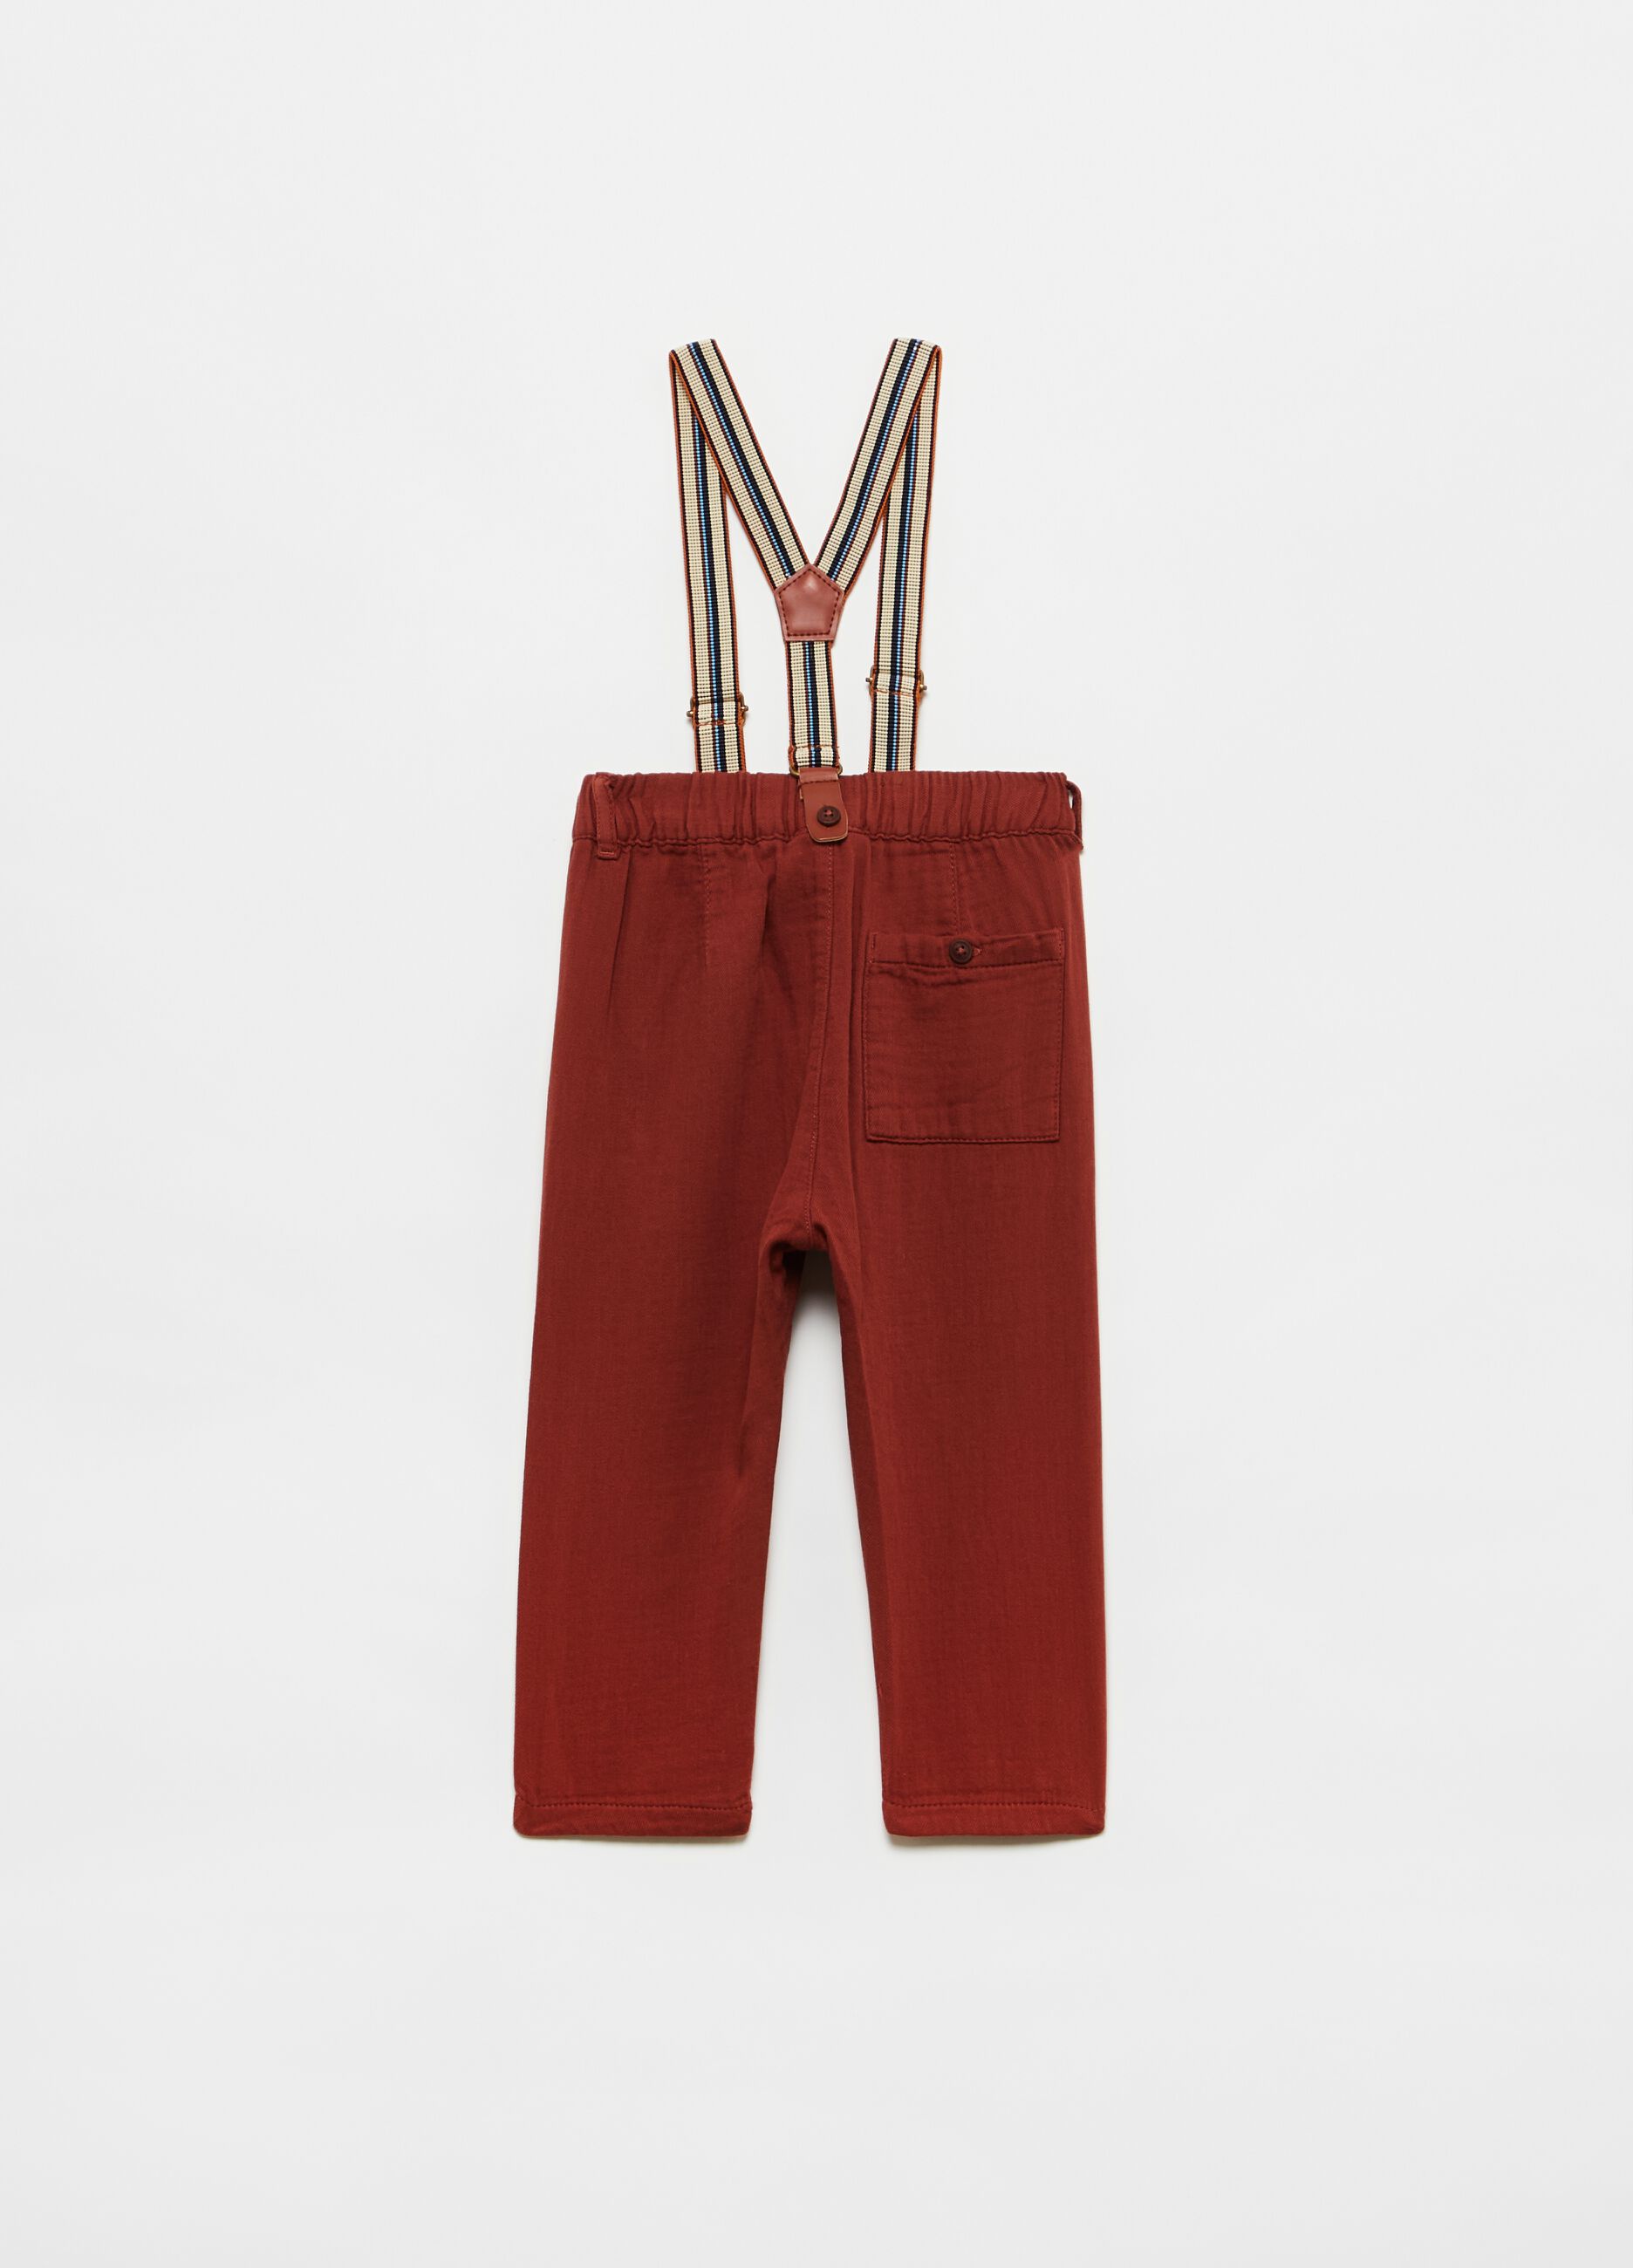 Cotton trousers with braces